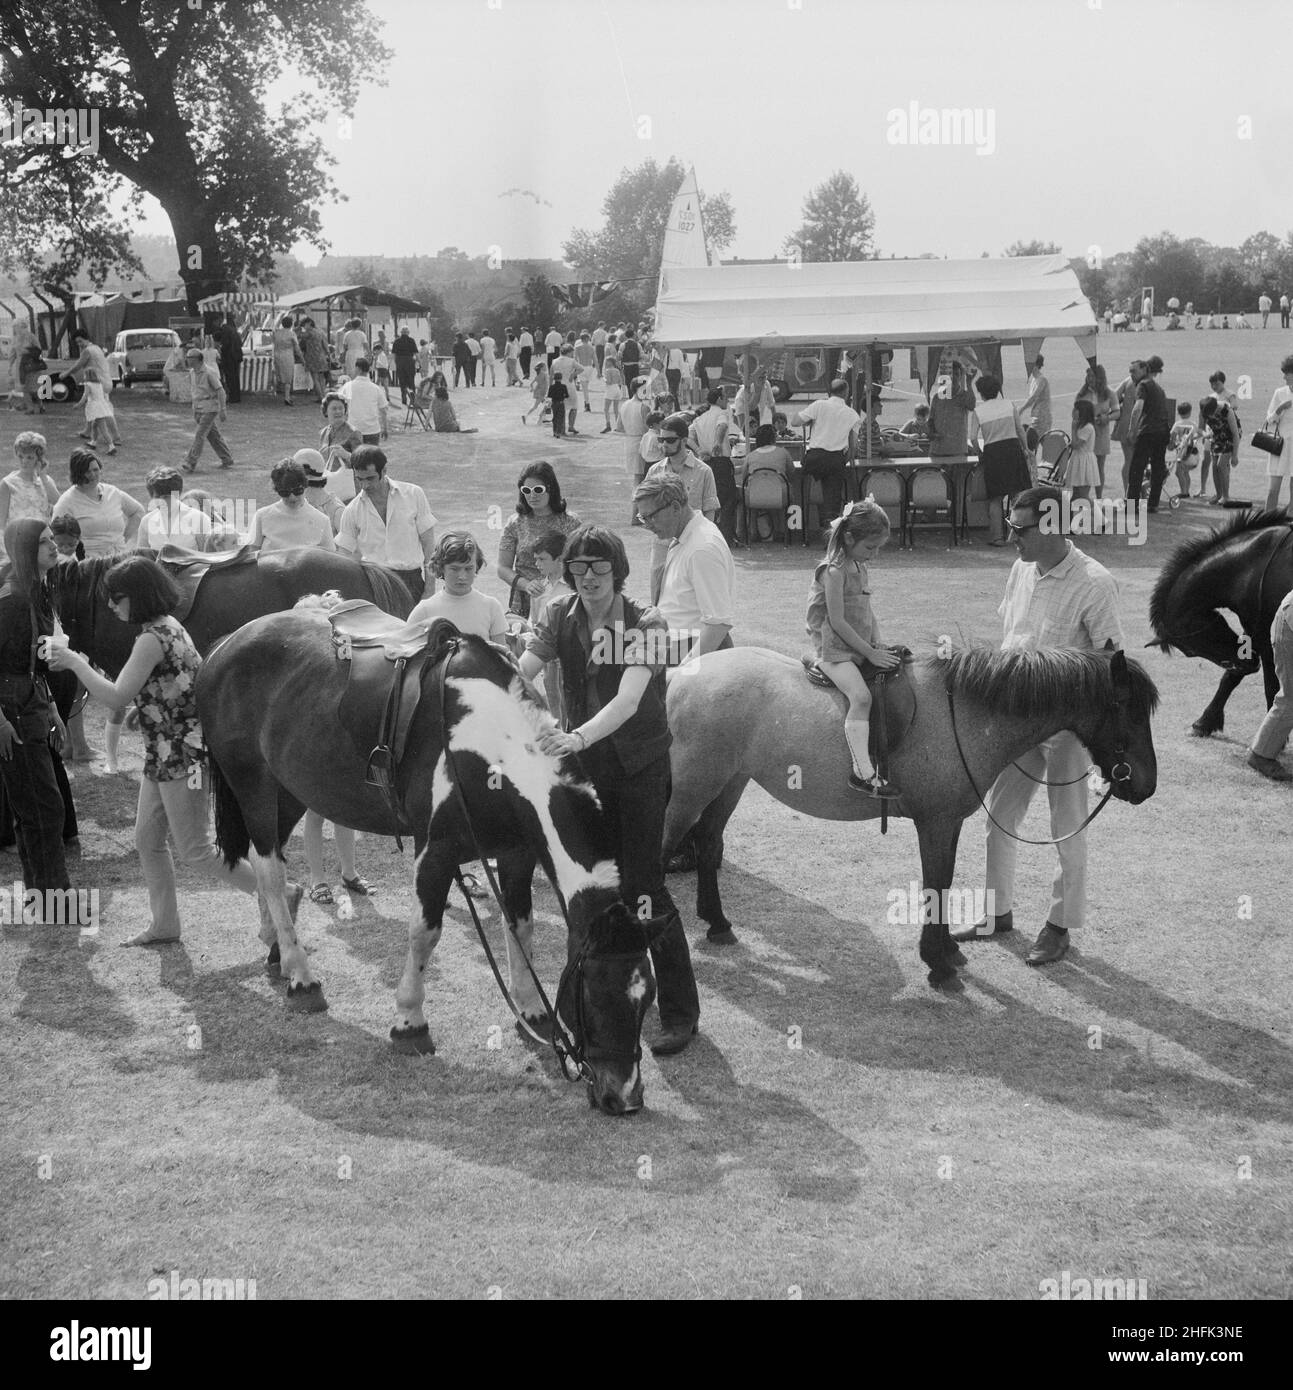 Laing Sports Ground, Rowley Lane, Elstree, Barnet, London, 14/06/1969. A Gala Day at the Laing Sports Ground at Elstree, showing children's pony rides in the foreground with stalls and crowds beyond. A Gala Day was held by Laing at the Laing Sports Ground on 14th June 1969, as a replacement of the annual Sports Day. Sports events were held by the Sports Club, which included hockey, tennis, bowls, and football tournaments. A traditional English fete programme featured coconut shies, bingo, pony rides, catering and a beer tent, candy floss, and roundabouts. The day ended with a beauty contest, p Stock Photo